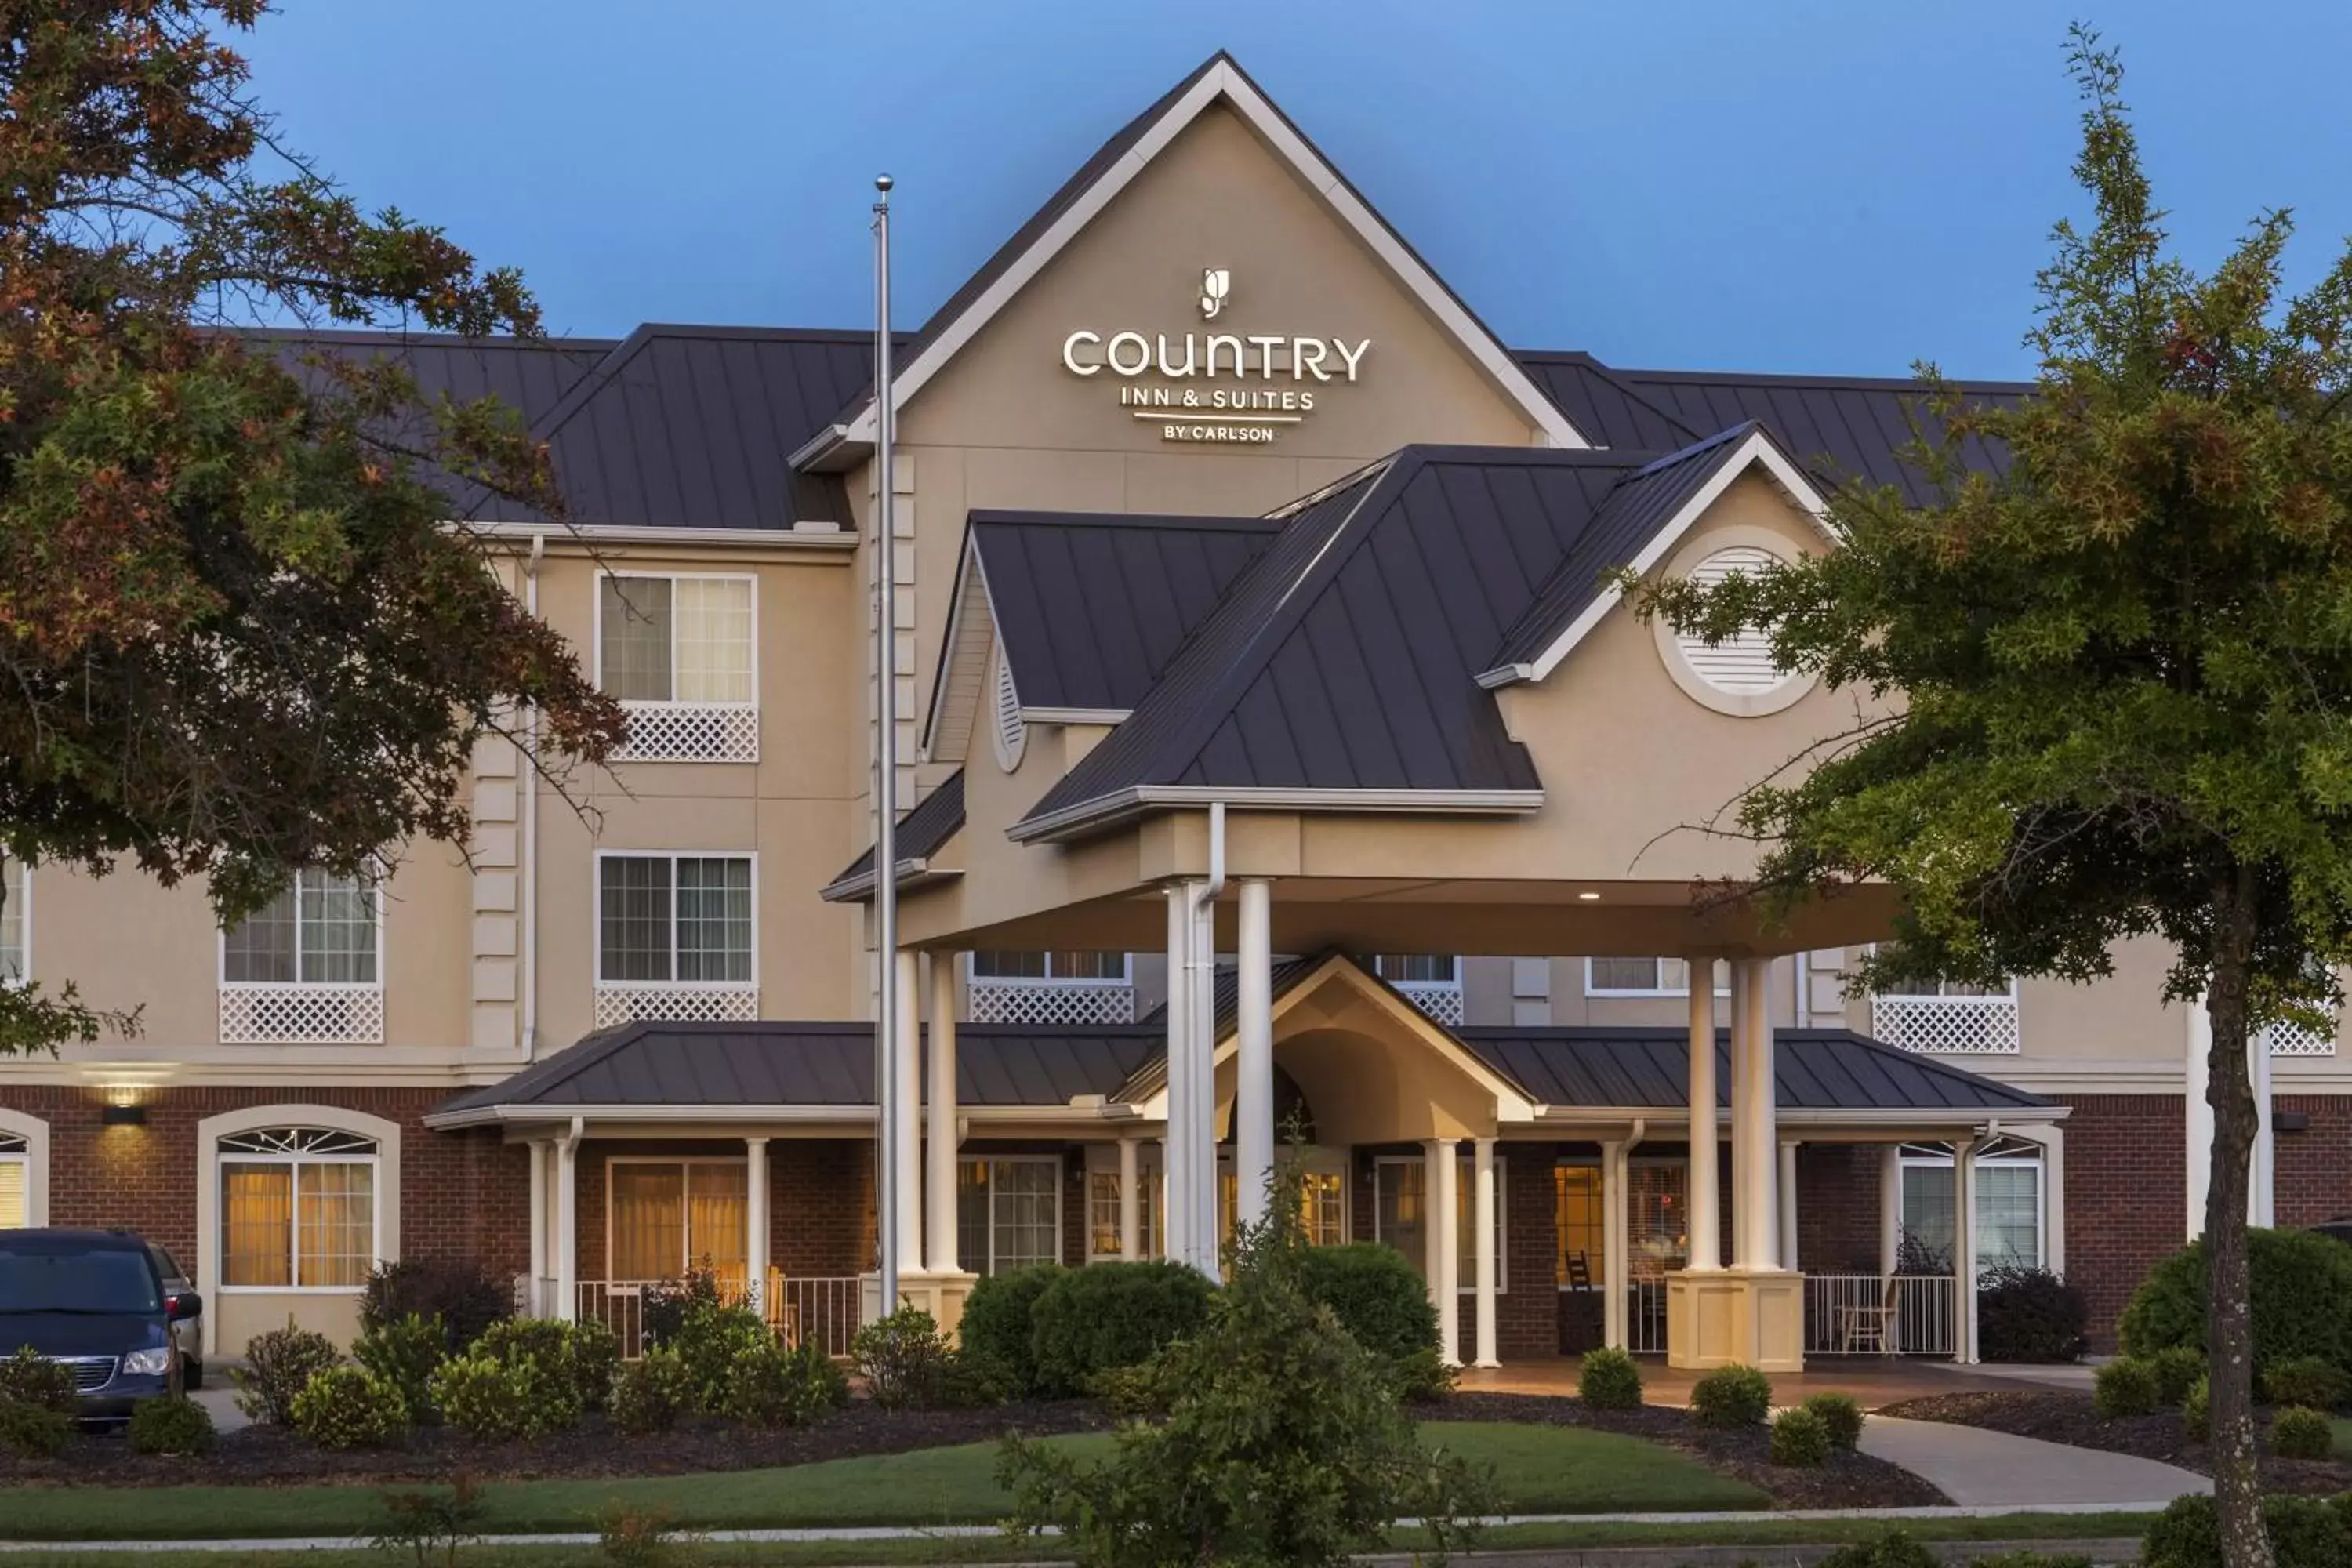 Facade/entrance, Property Building in Country Inn & Suites by Radisson, Madison, AL